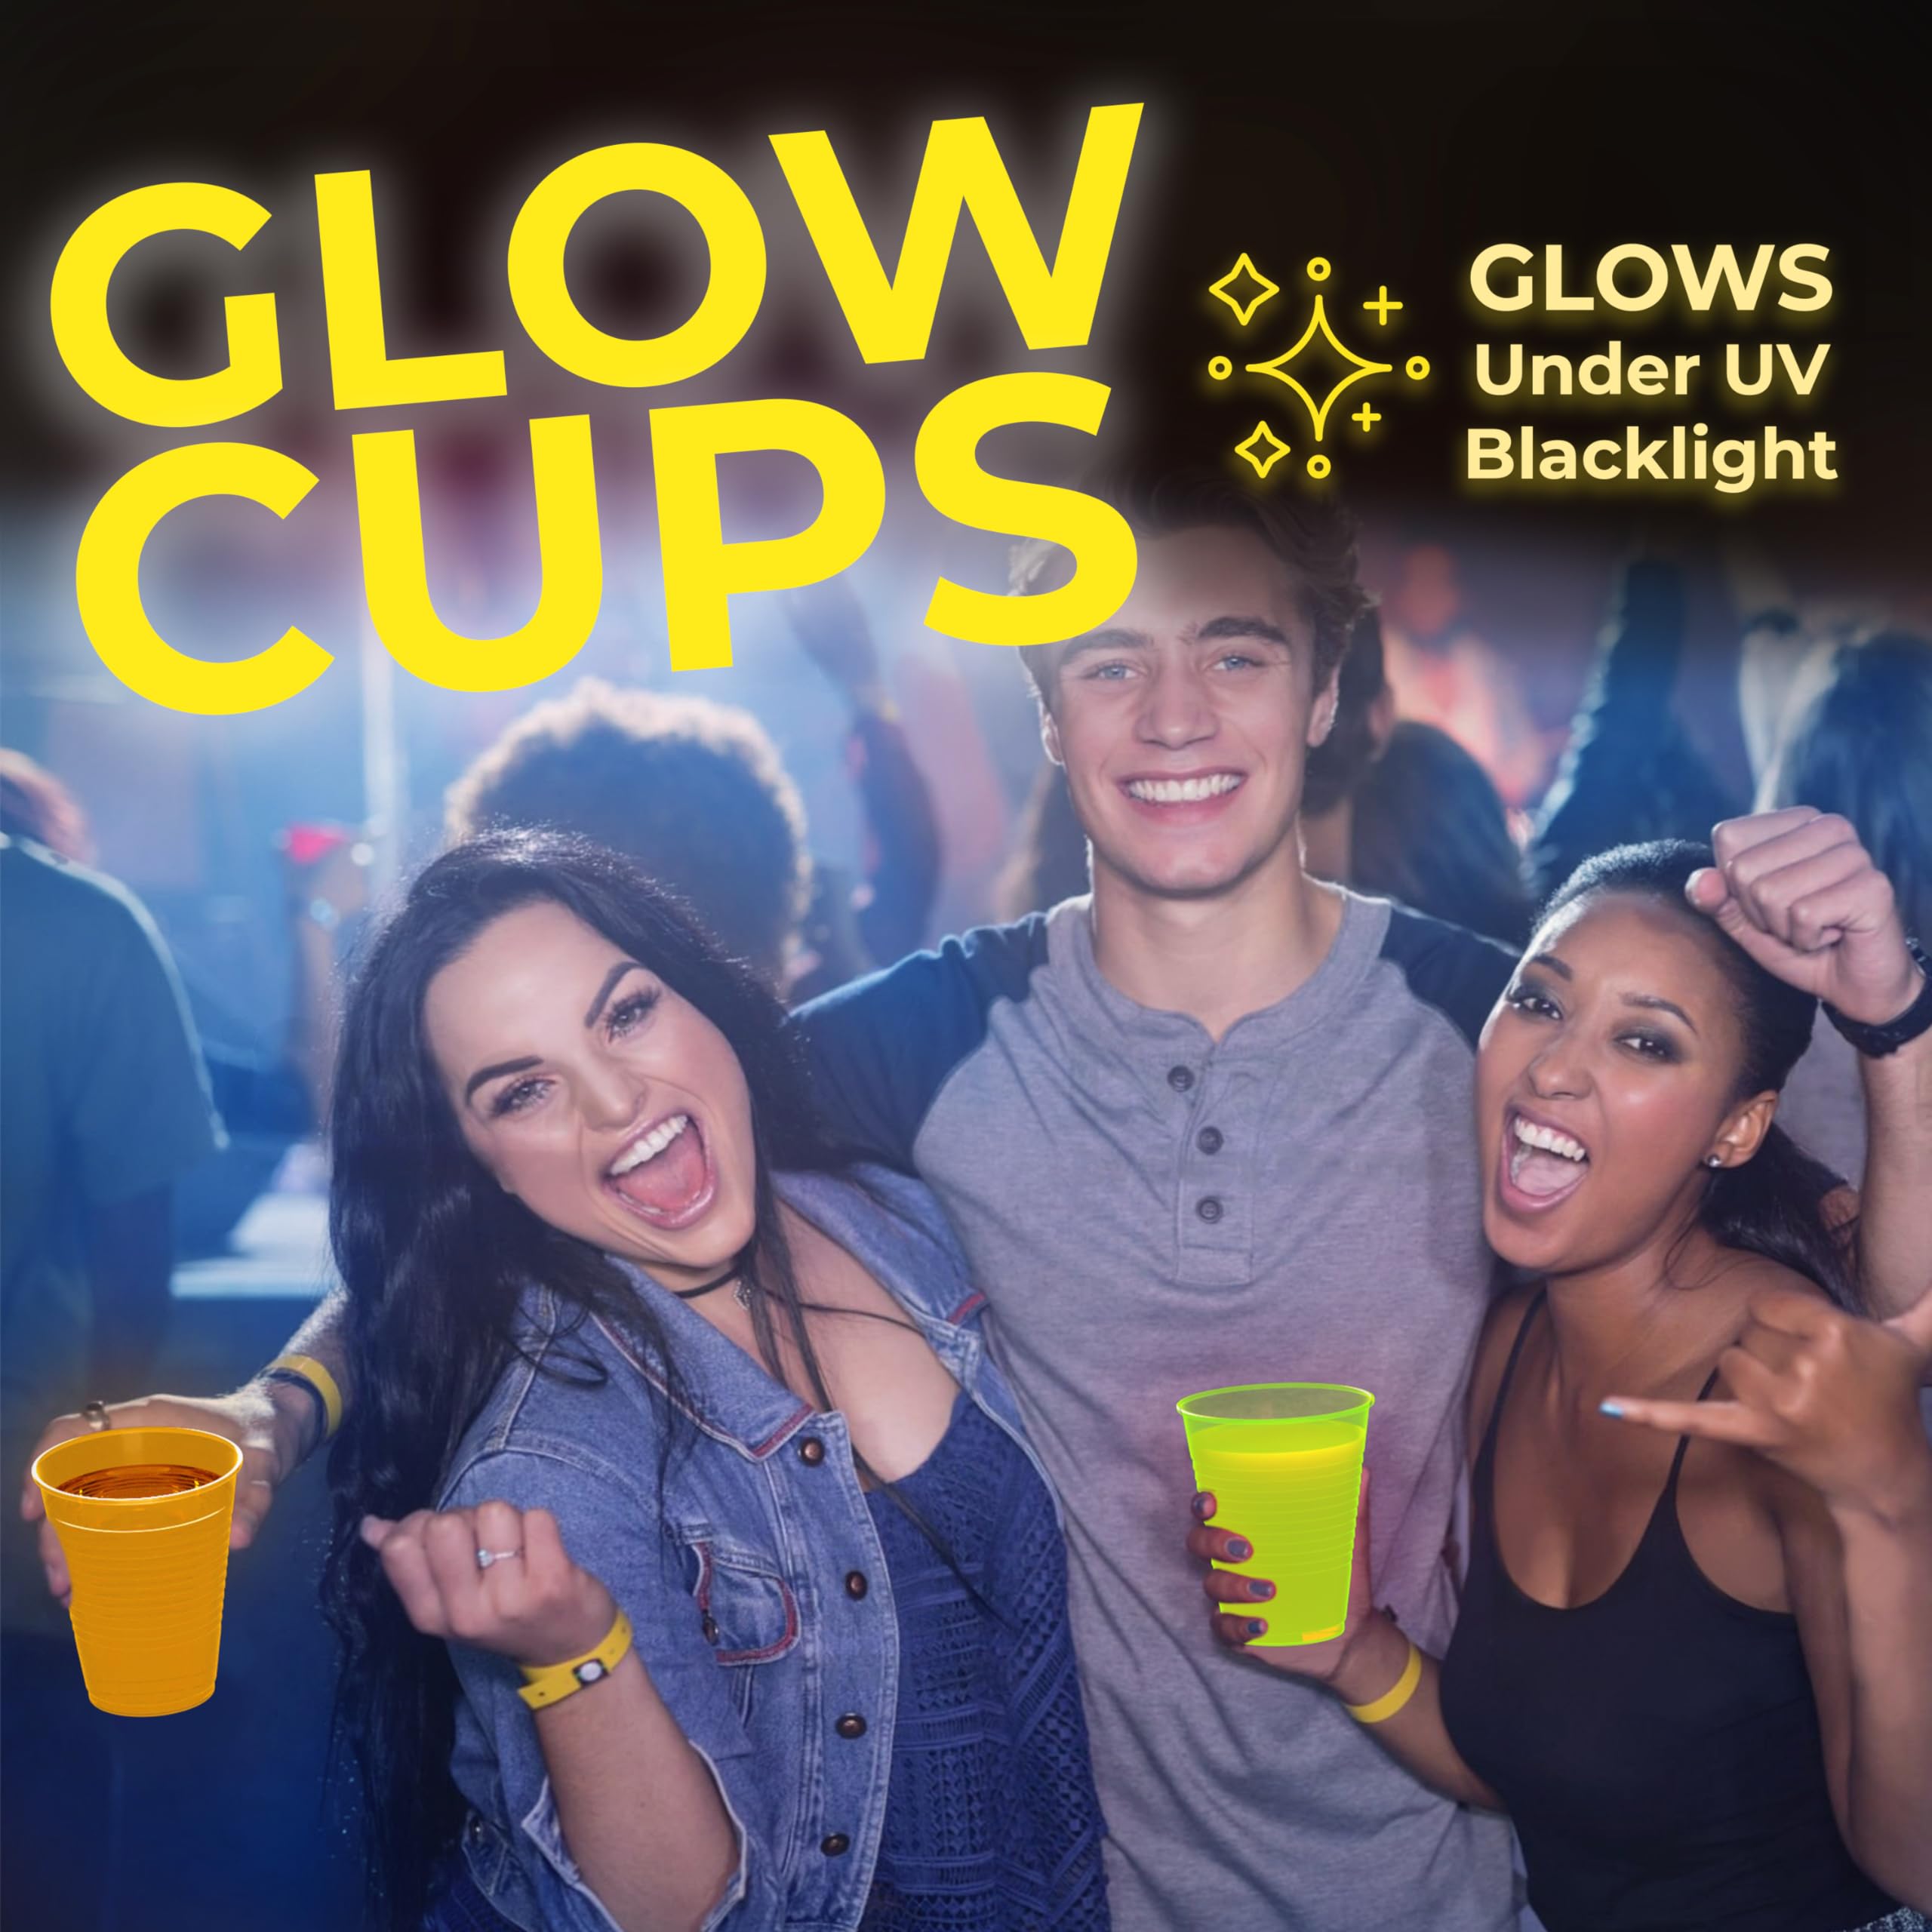 12 Oz. Neon Assorted Color Plastic Cups | 60 Count